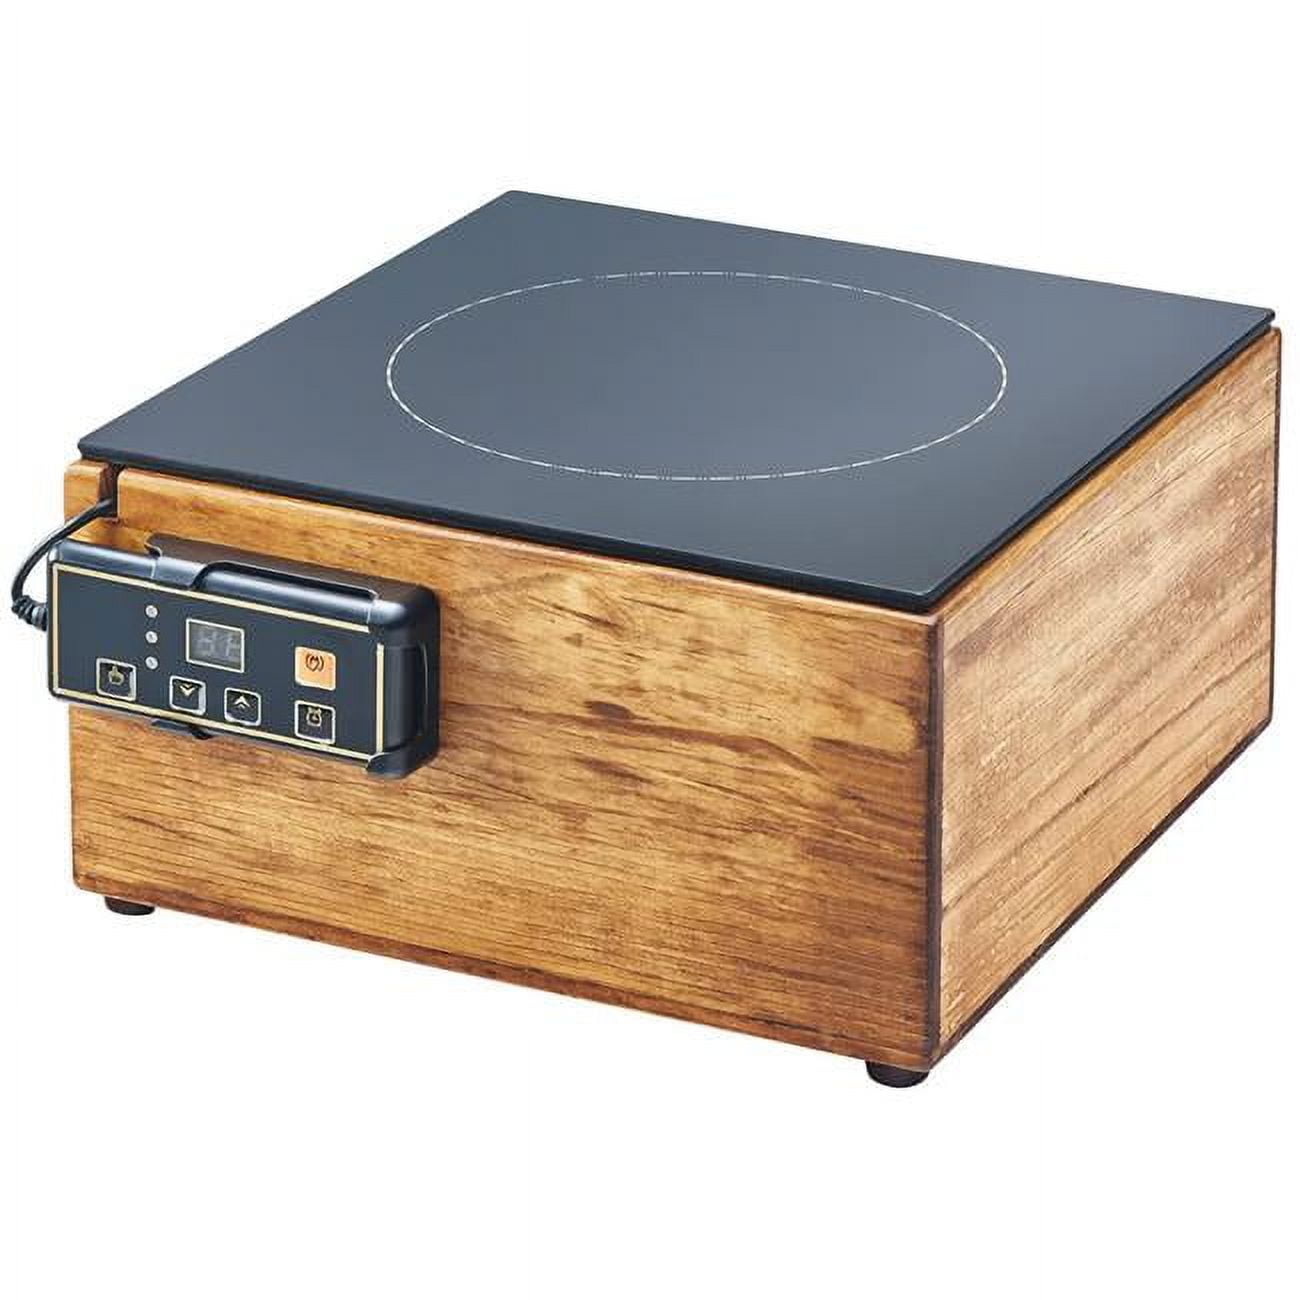 Picture of Cal Mil 3633-99 Madera Reclaimed Wood Countertop Induction Cooker - 120V, 1600W - 12 x 12 x 6 in.